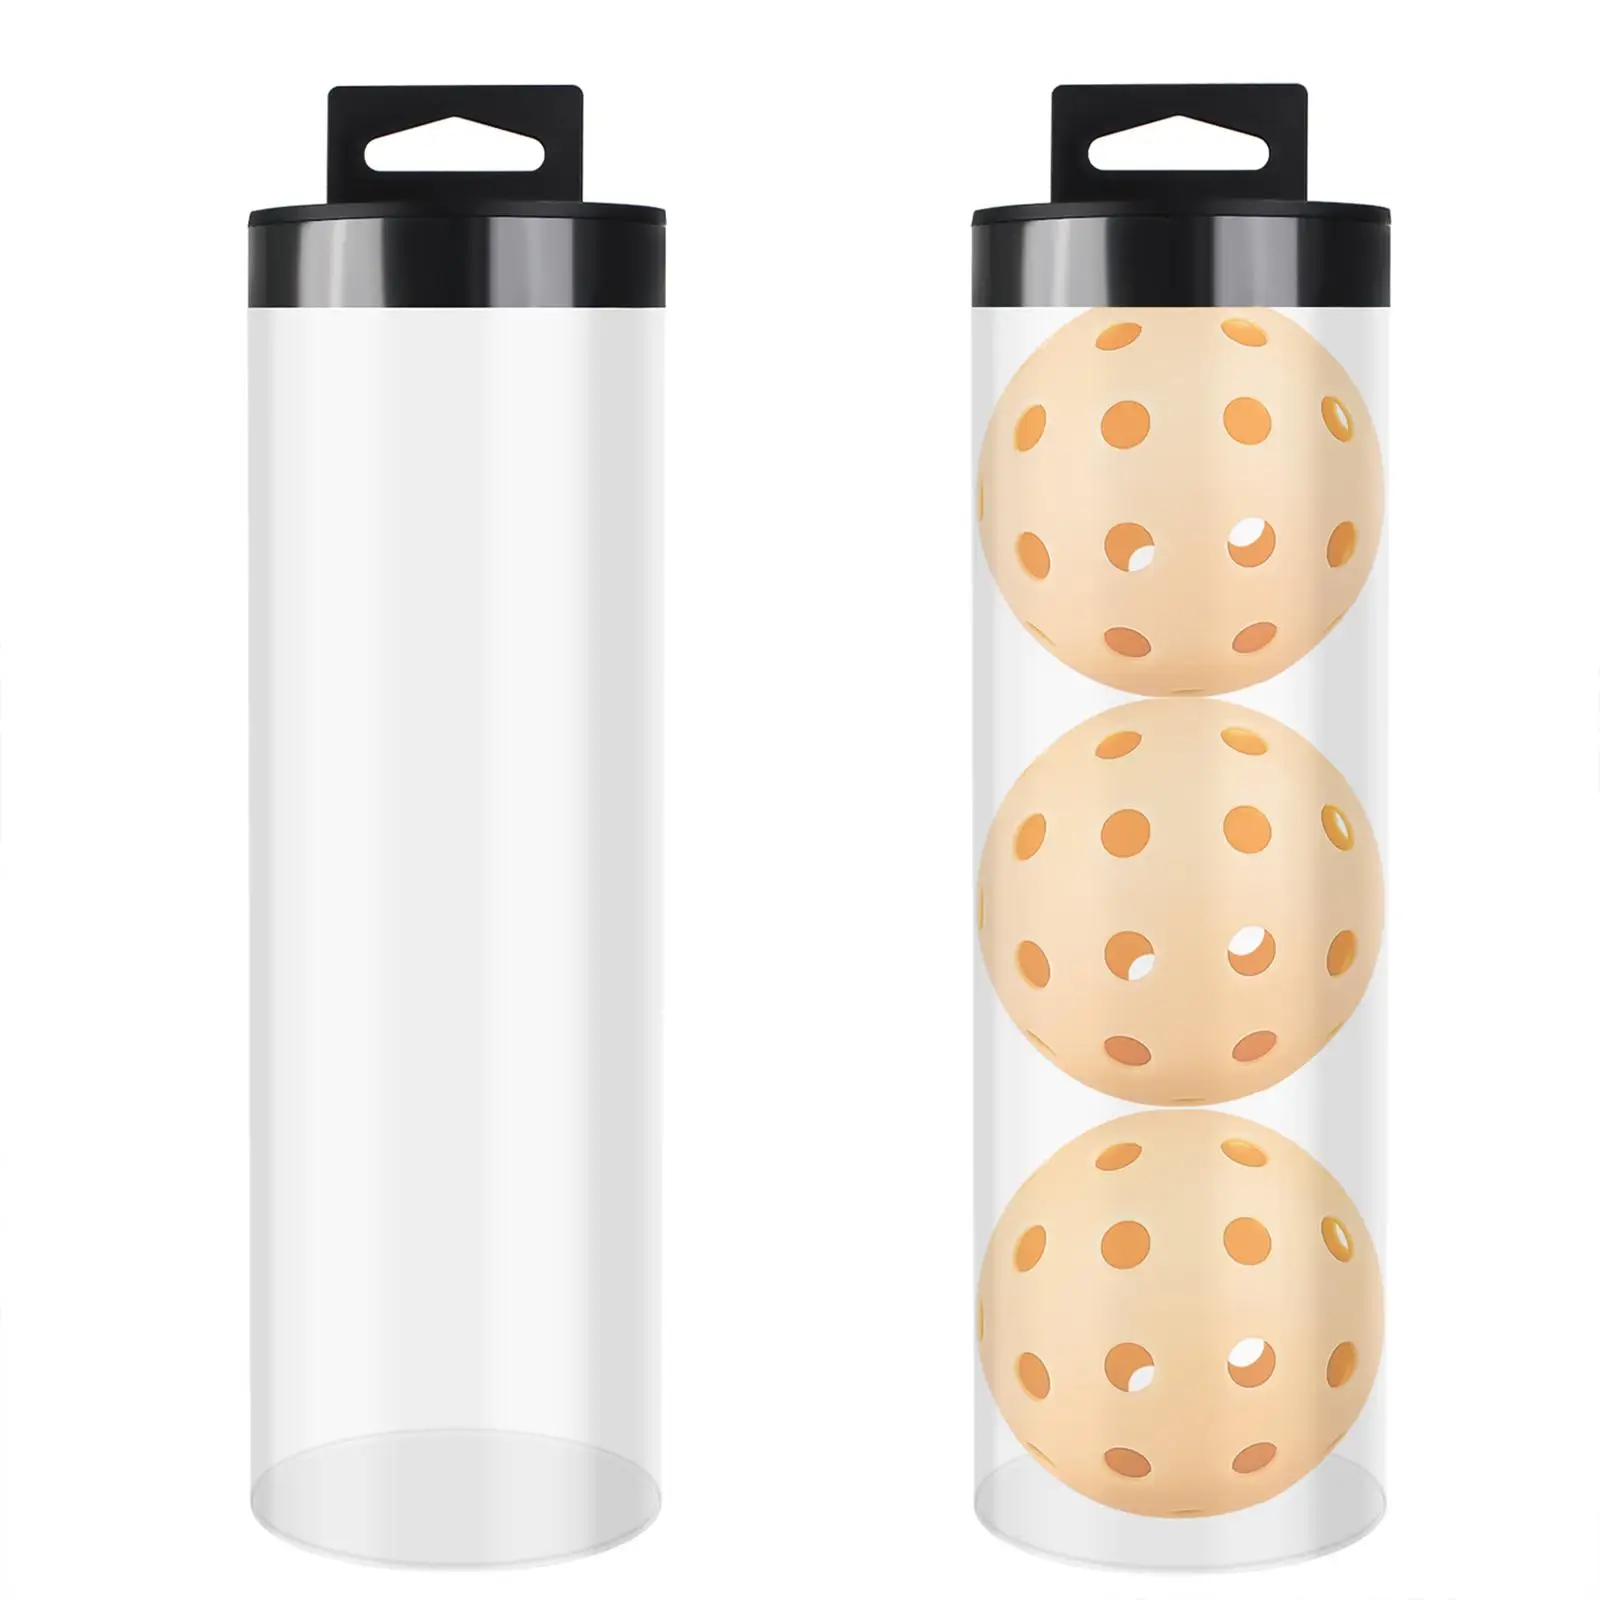 Tennis Ball Holder Carrier Gadgets Transparent Storage Tin Pickleball Bucket Canister Cylinder for Training Practice Accessories